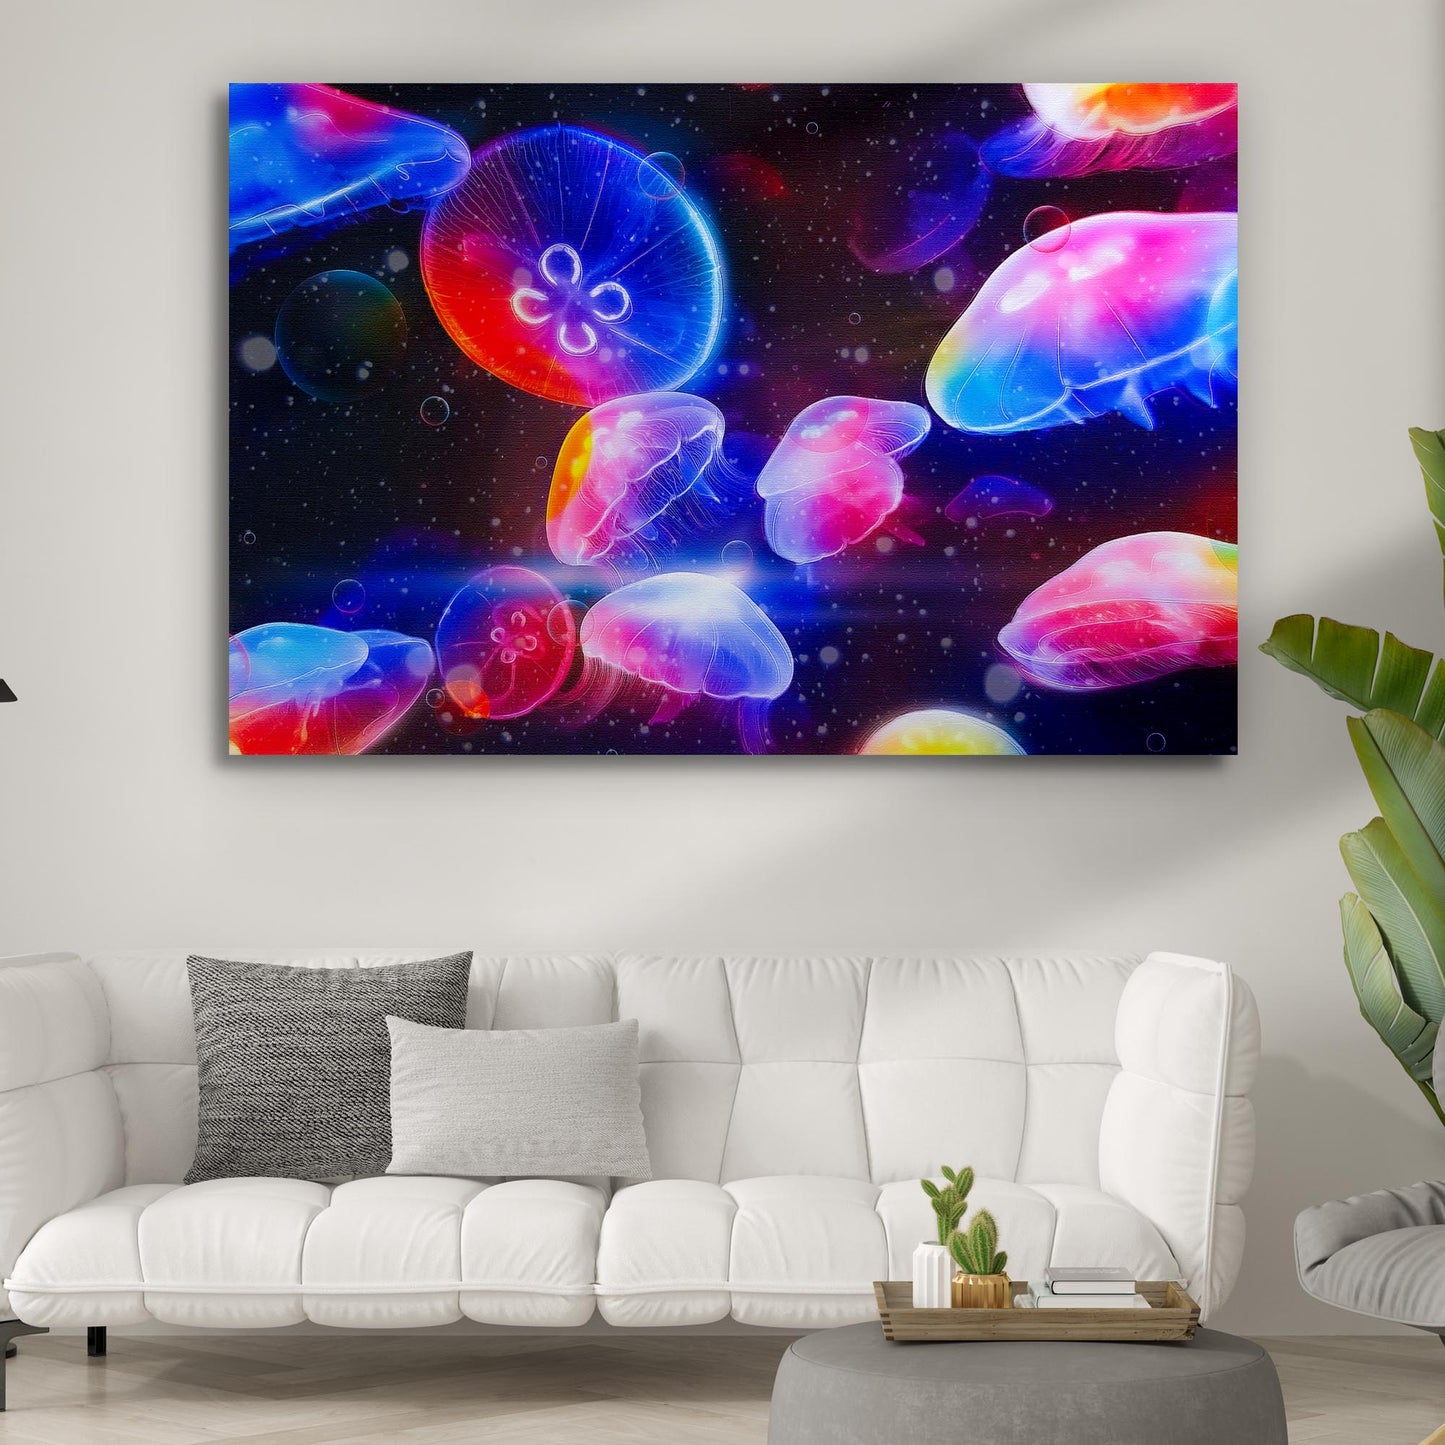 Glow in the Dark Jellyfish Canvas Wall Art - Image by Tailored Canvases